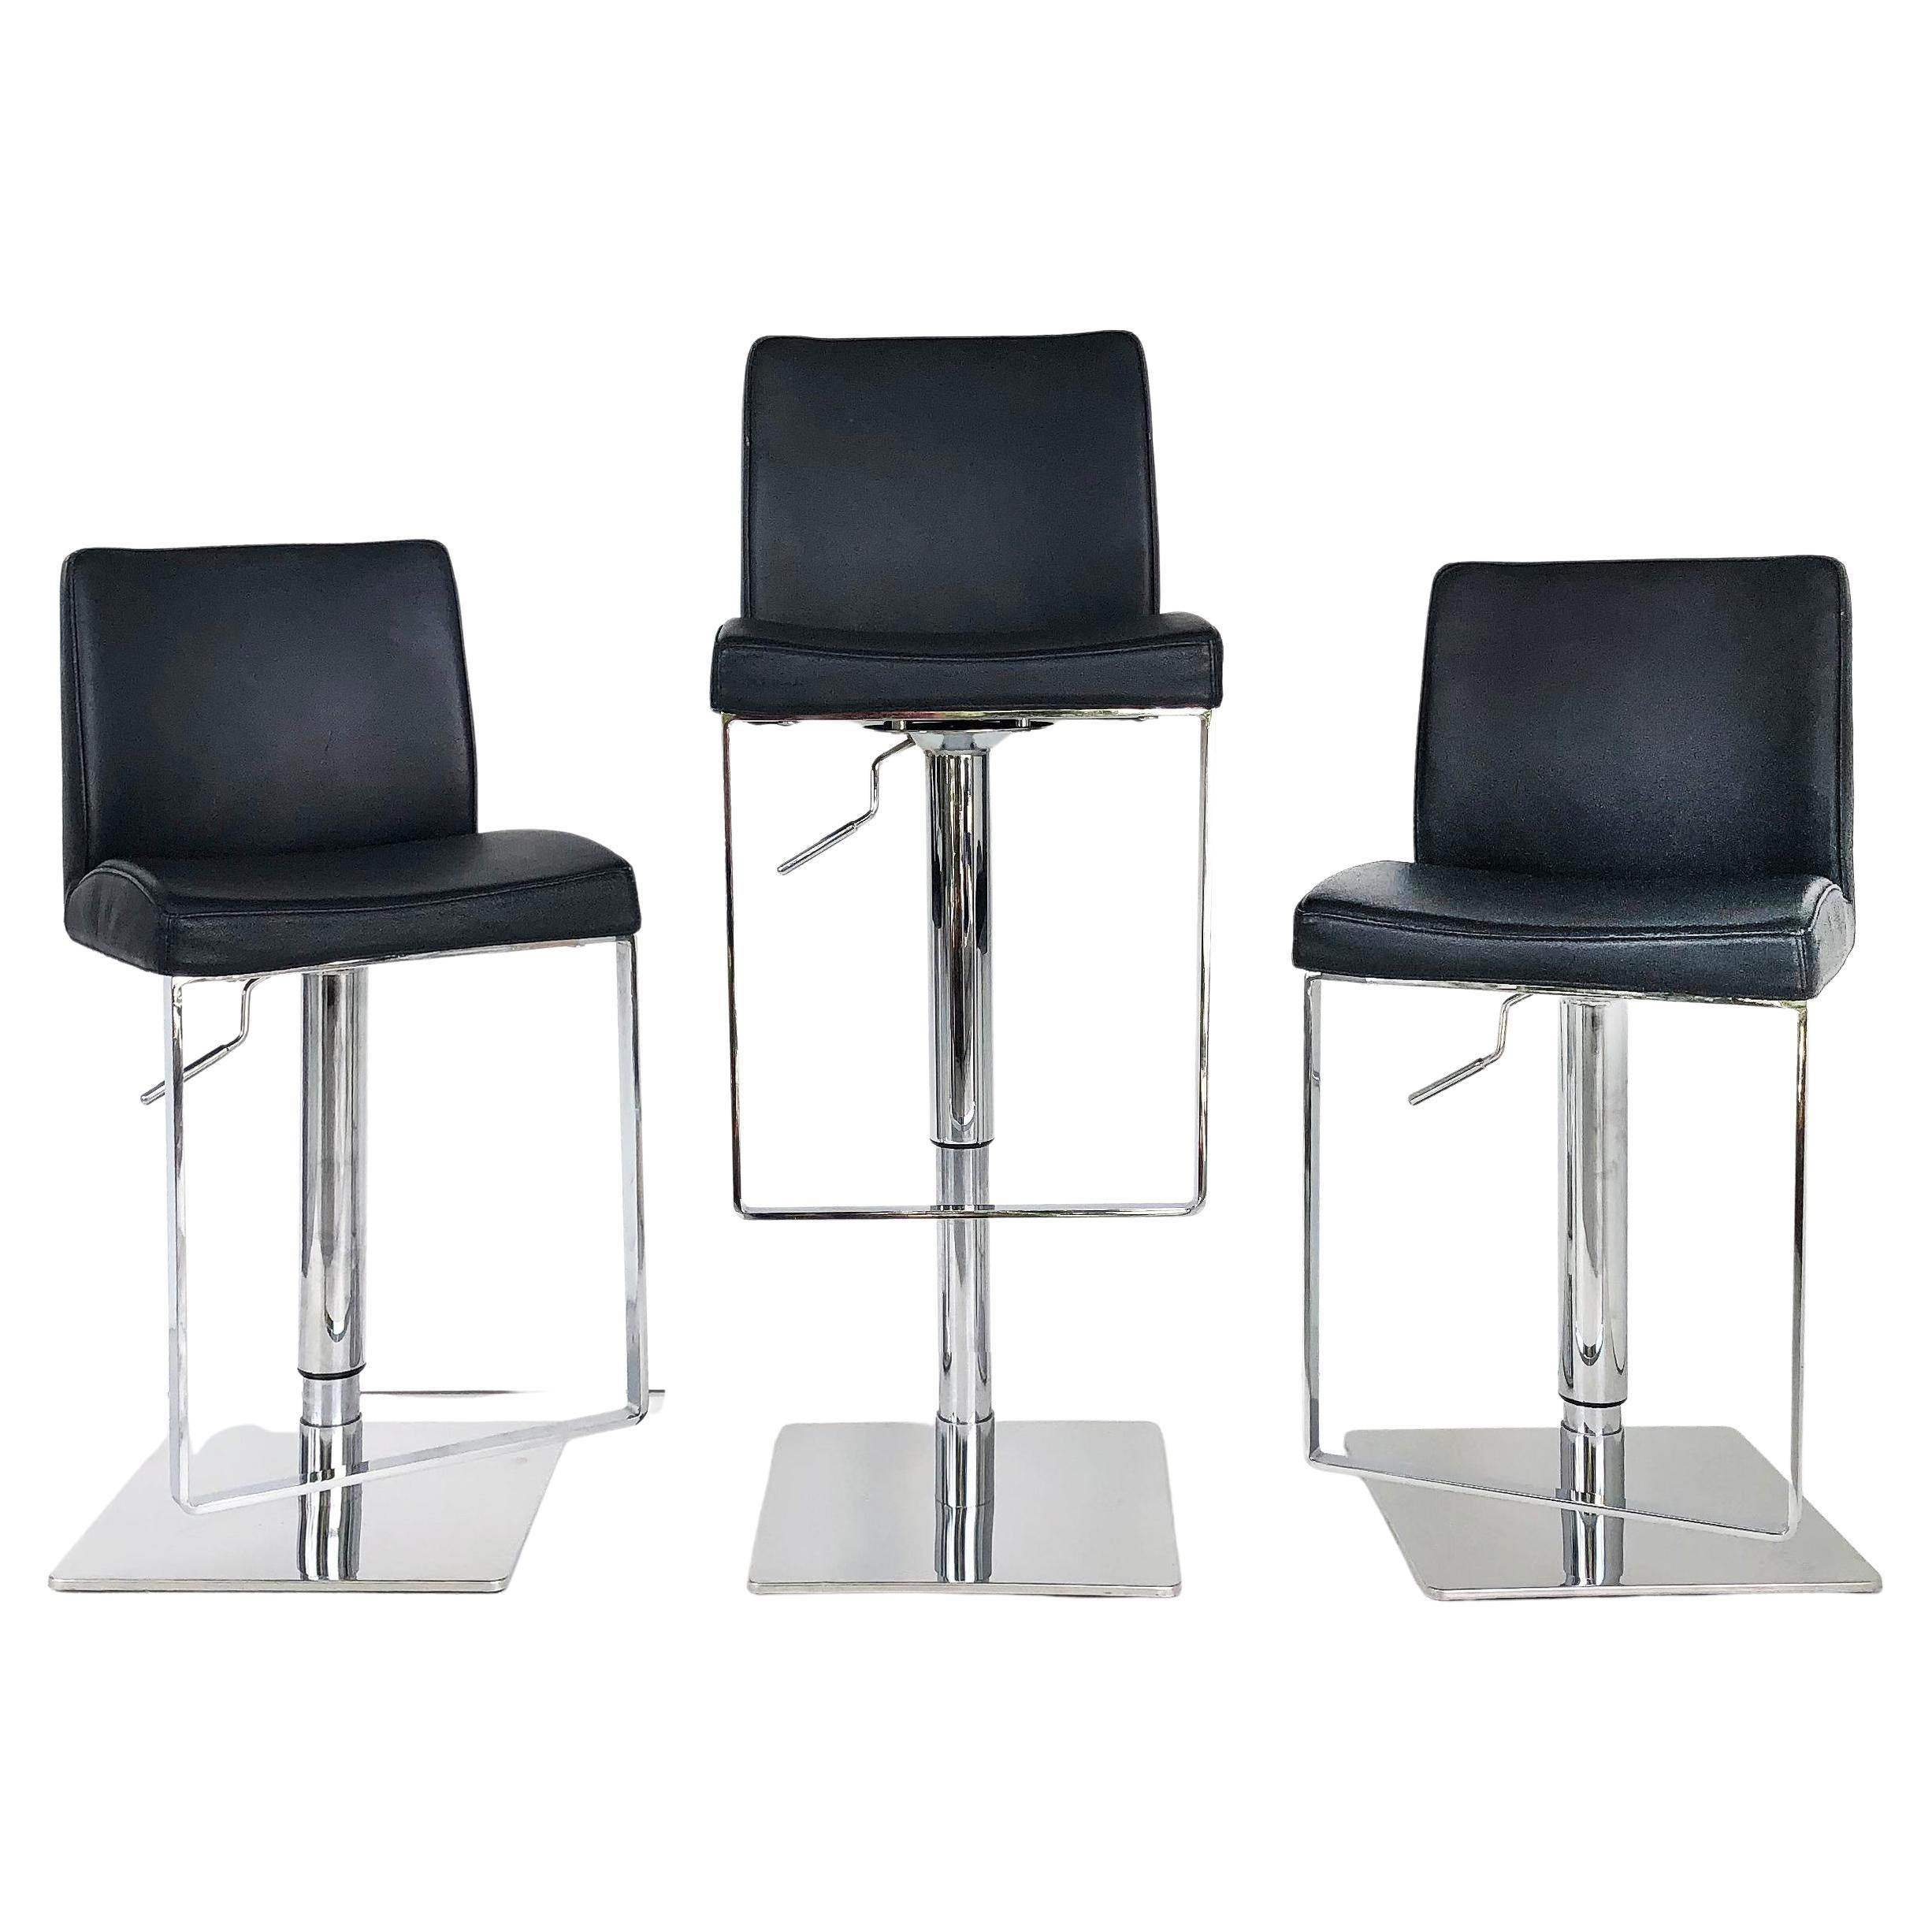 Adjustable Stainless Steel/Leather Counter/Bar Stools, Set of 3